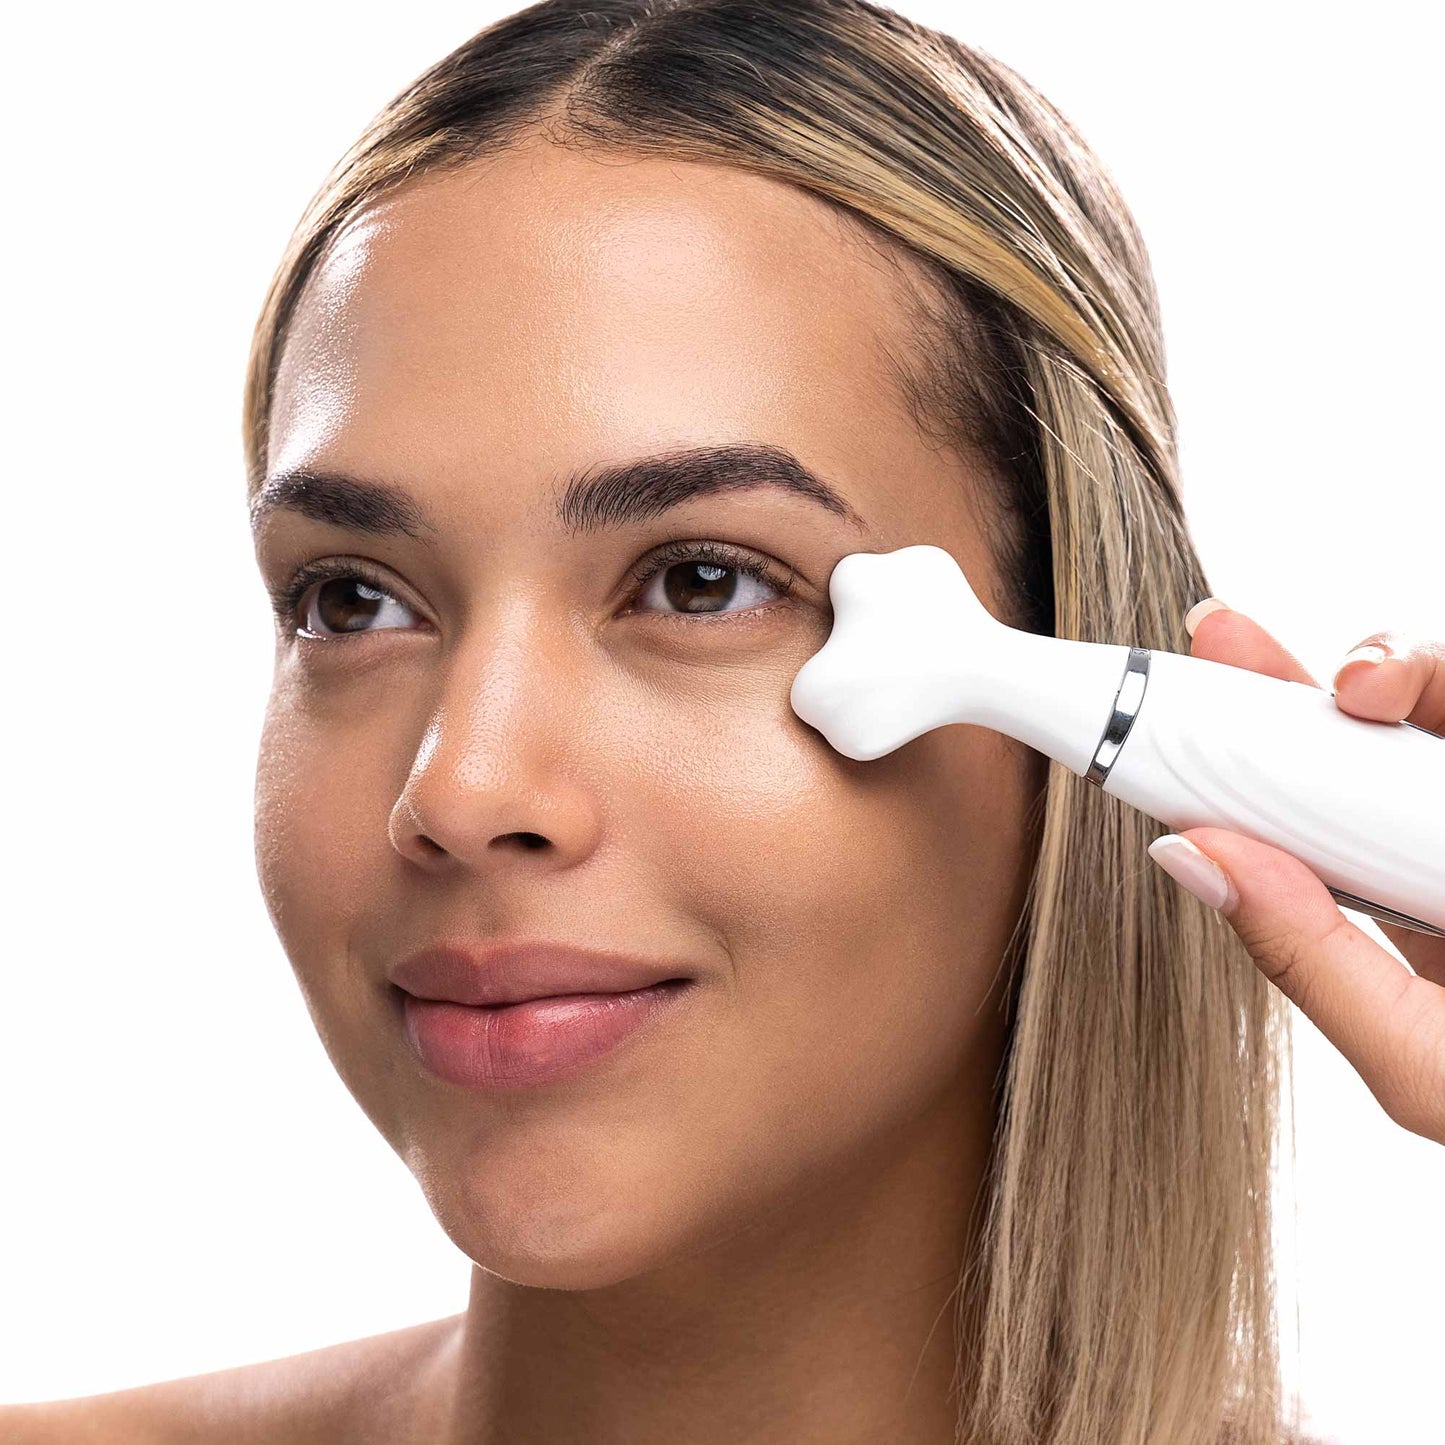 A woman is using a LORI sonic wand by Spa Sciences to promote blood circulation on her face, aiming to minimize fine lines.